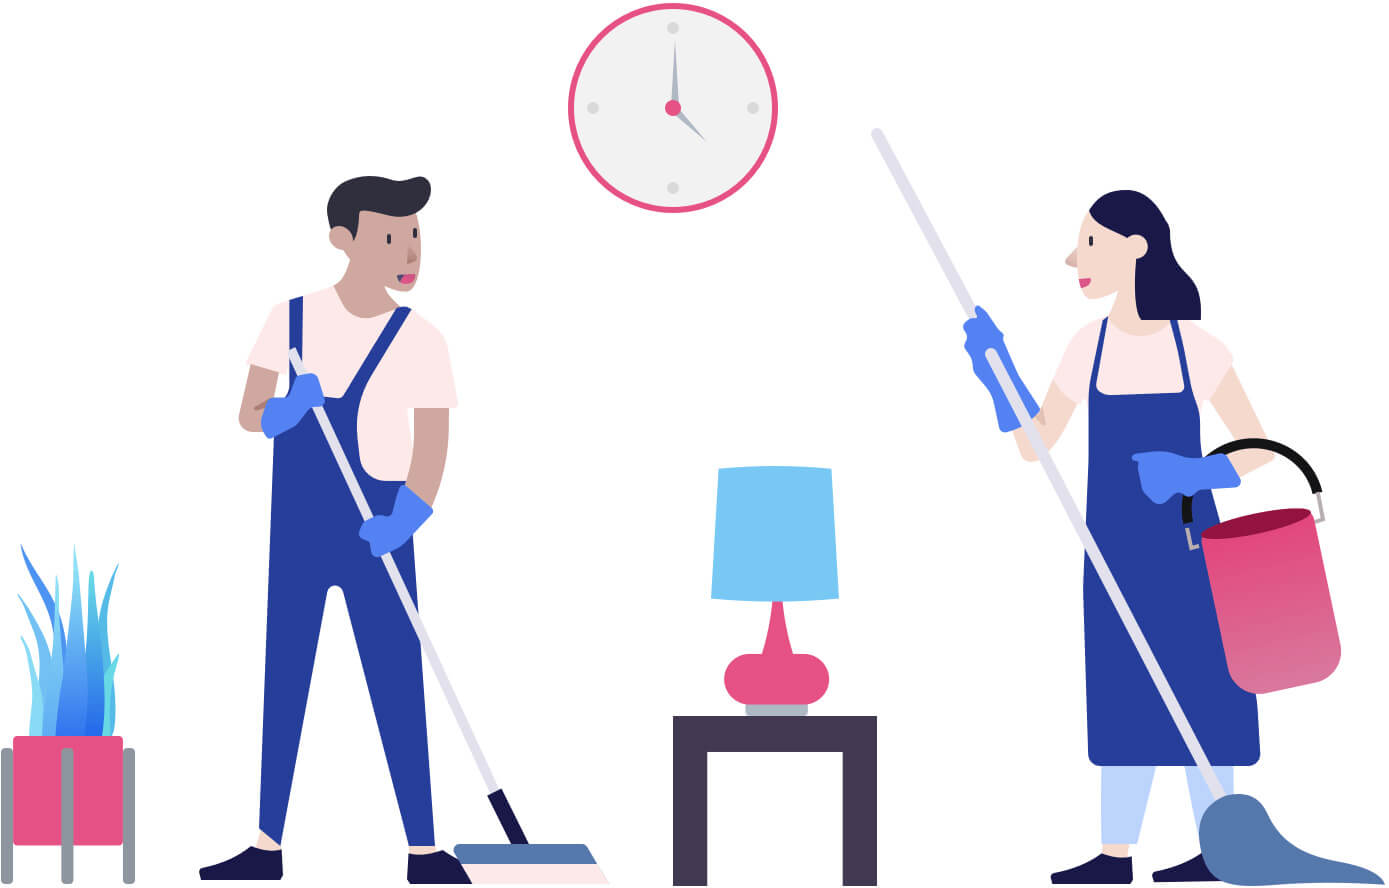 Cleaning Services Sydney